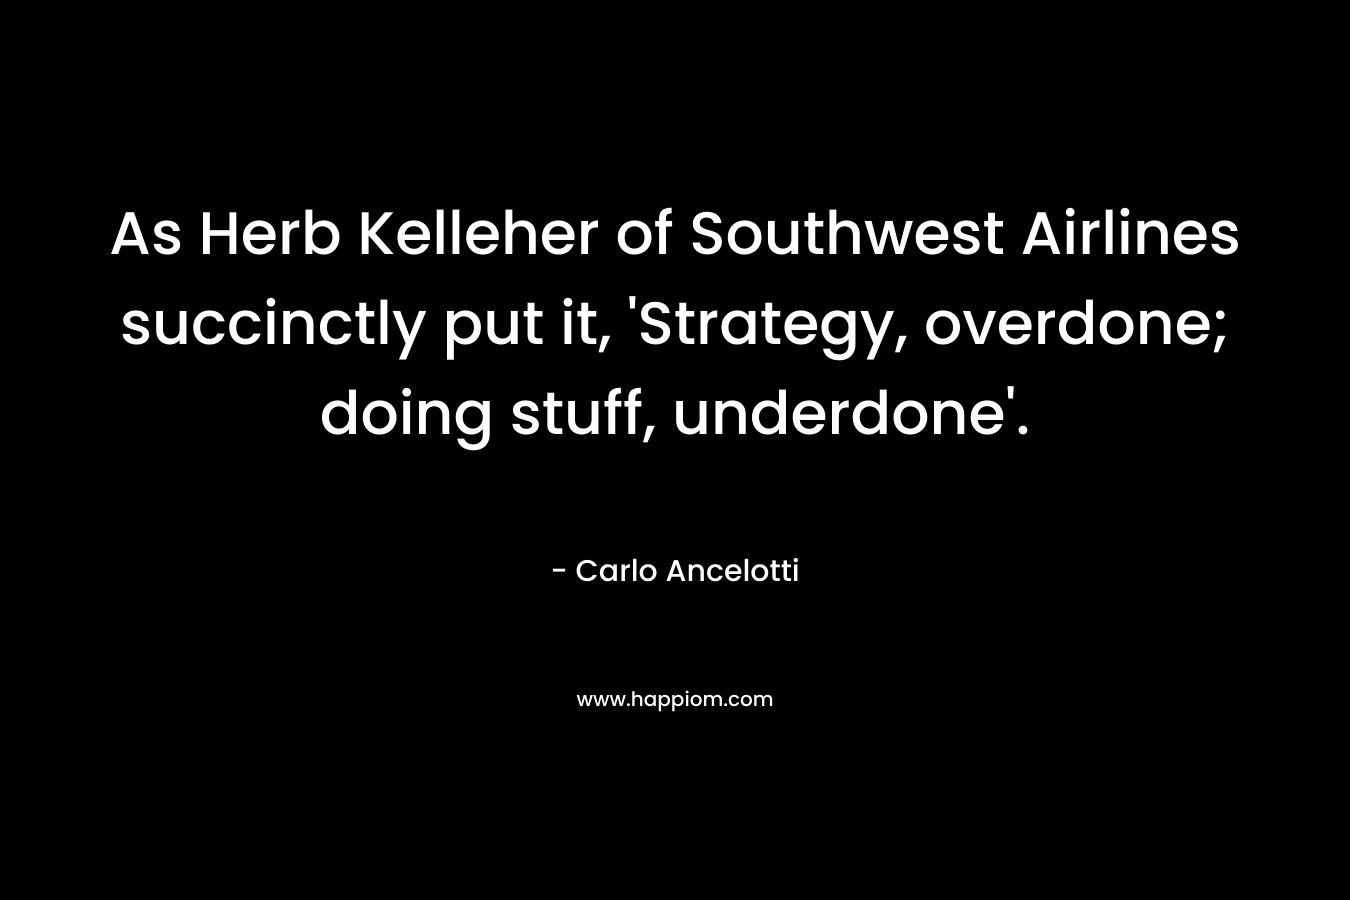 As Herb Kelleher of Southwest Airlines succinctly put it, ‘Strategy, overdone; doing stuff, underdone’. – Carlo Ancelotti